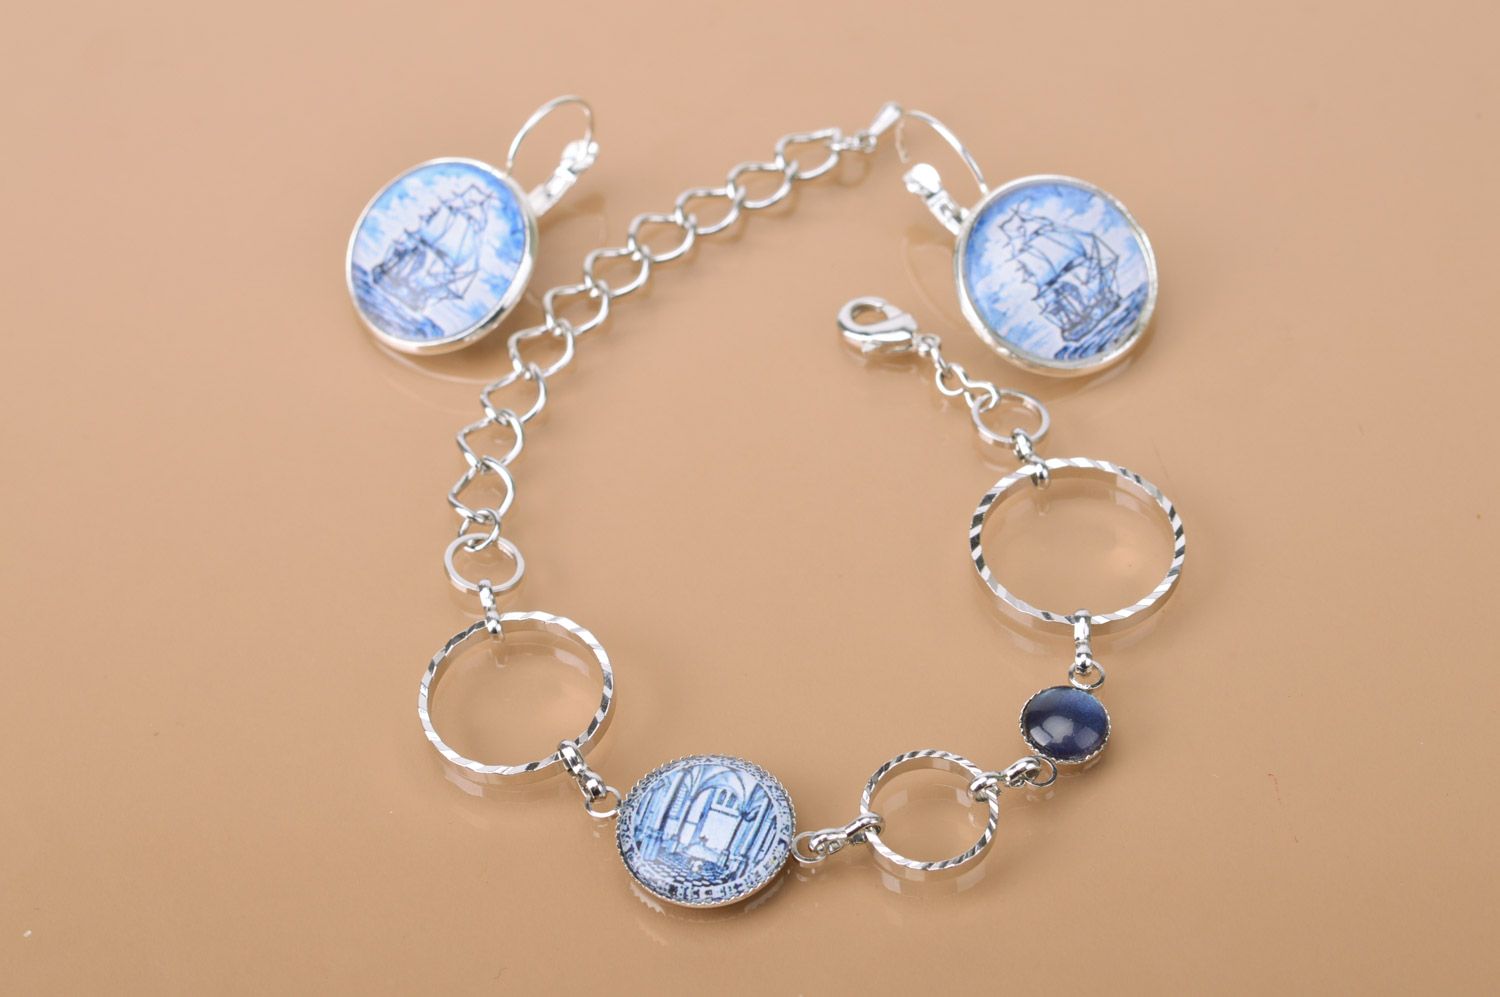 Handmade set of metal jewelry earrings and bracelet with print in nautical style photo 2